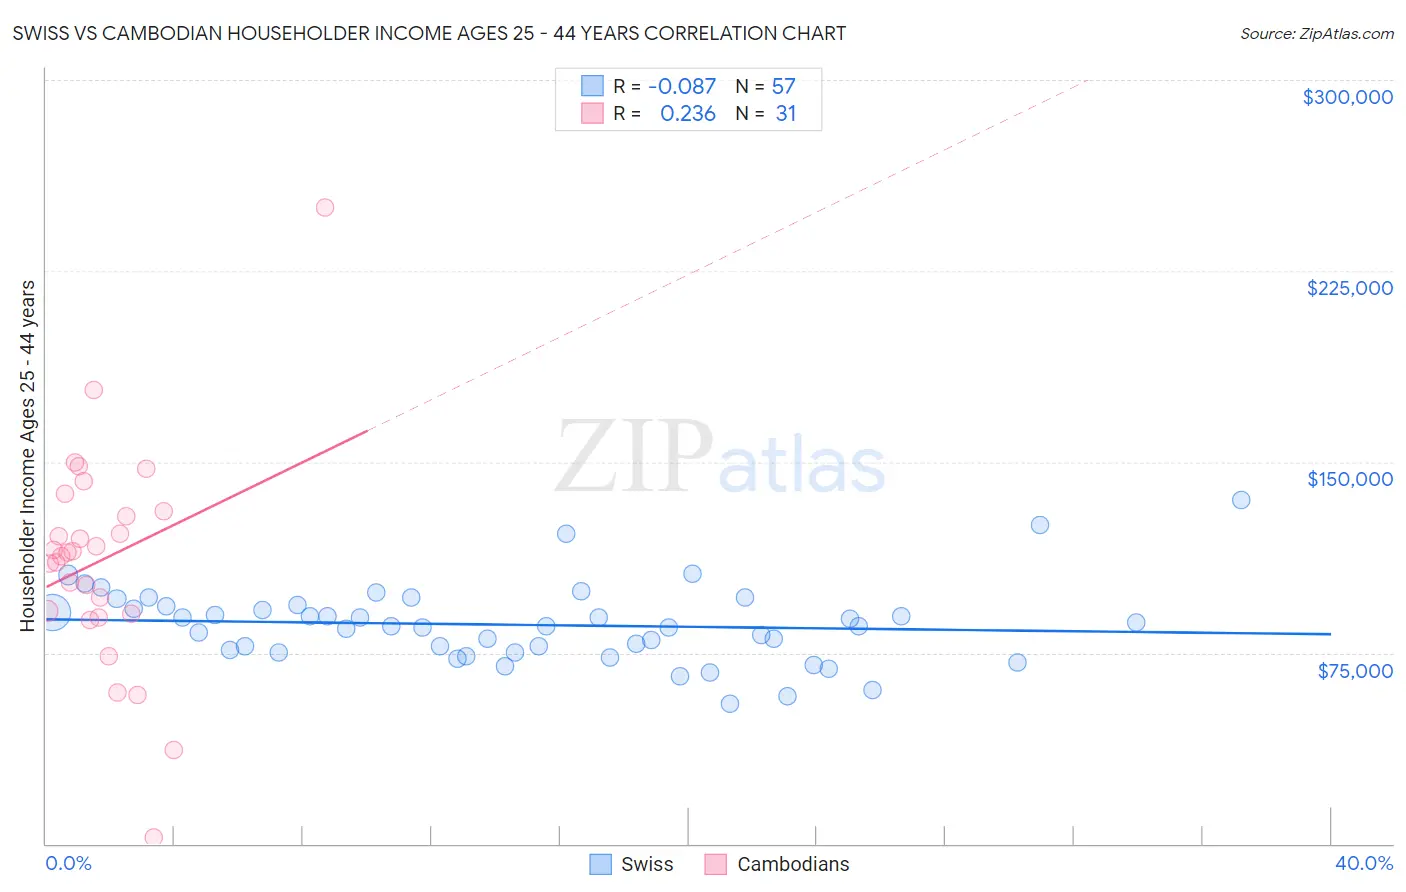 Swiss vs Cambodian Householder Income Ages 25 - 44 years